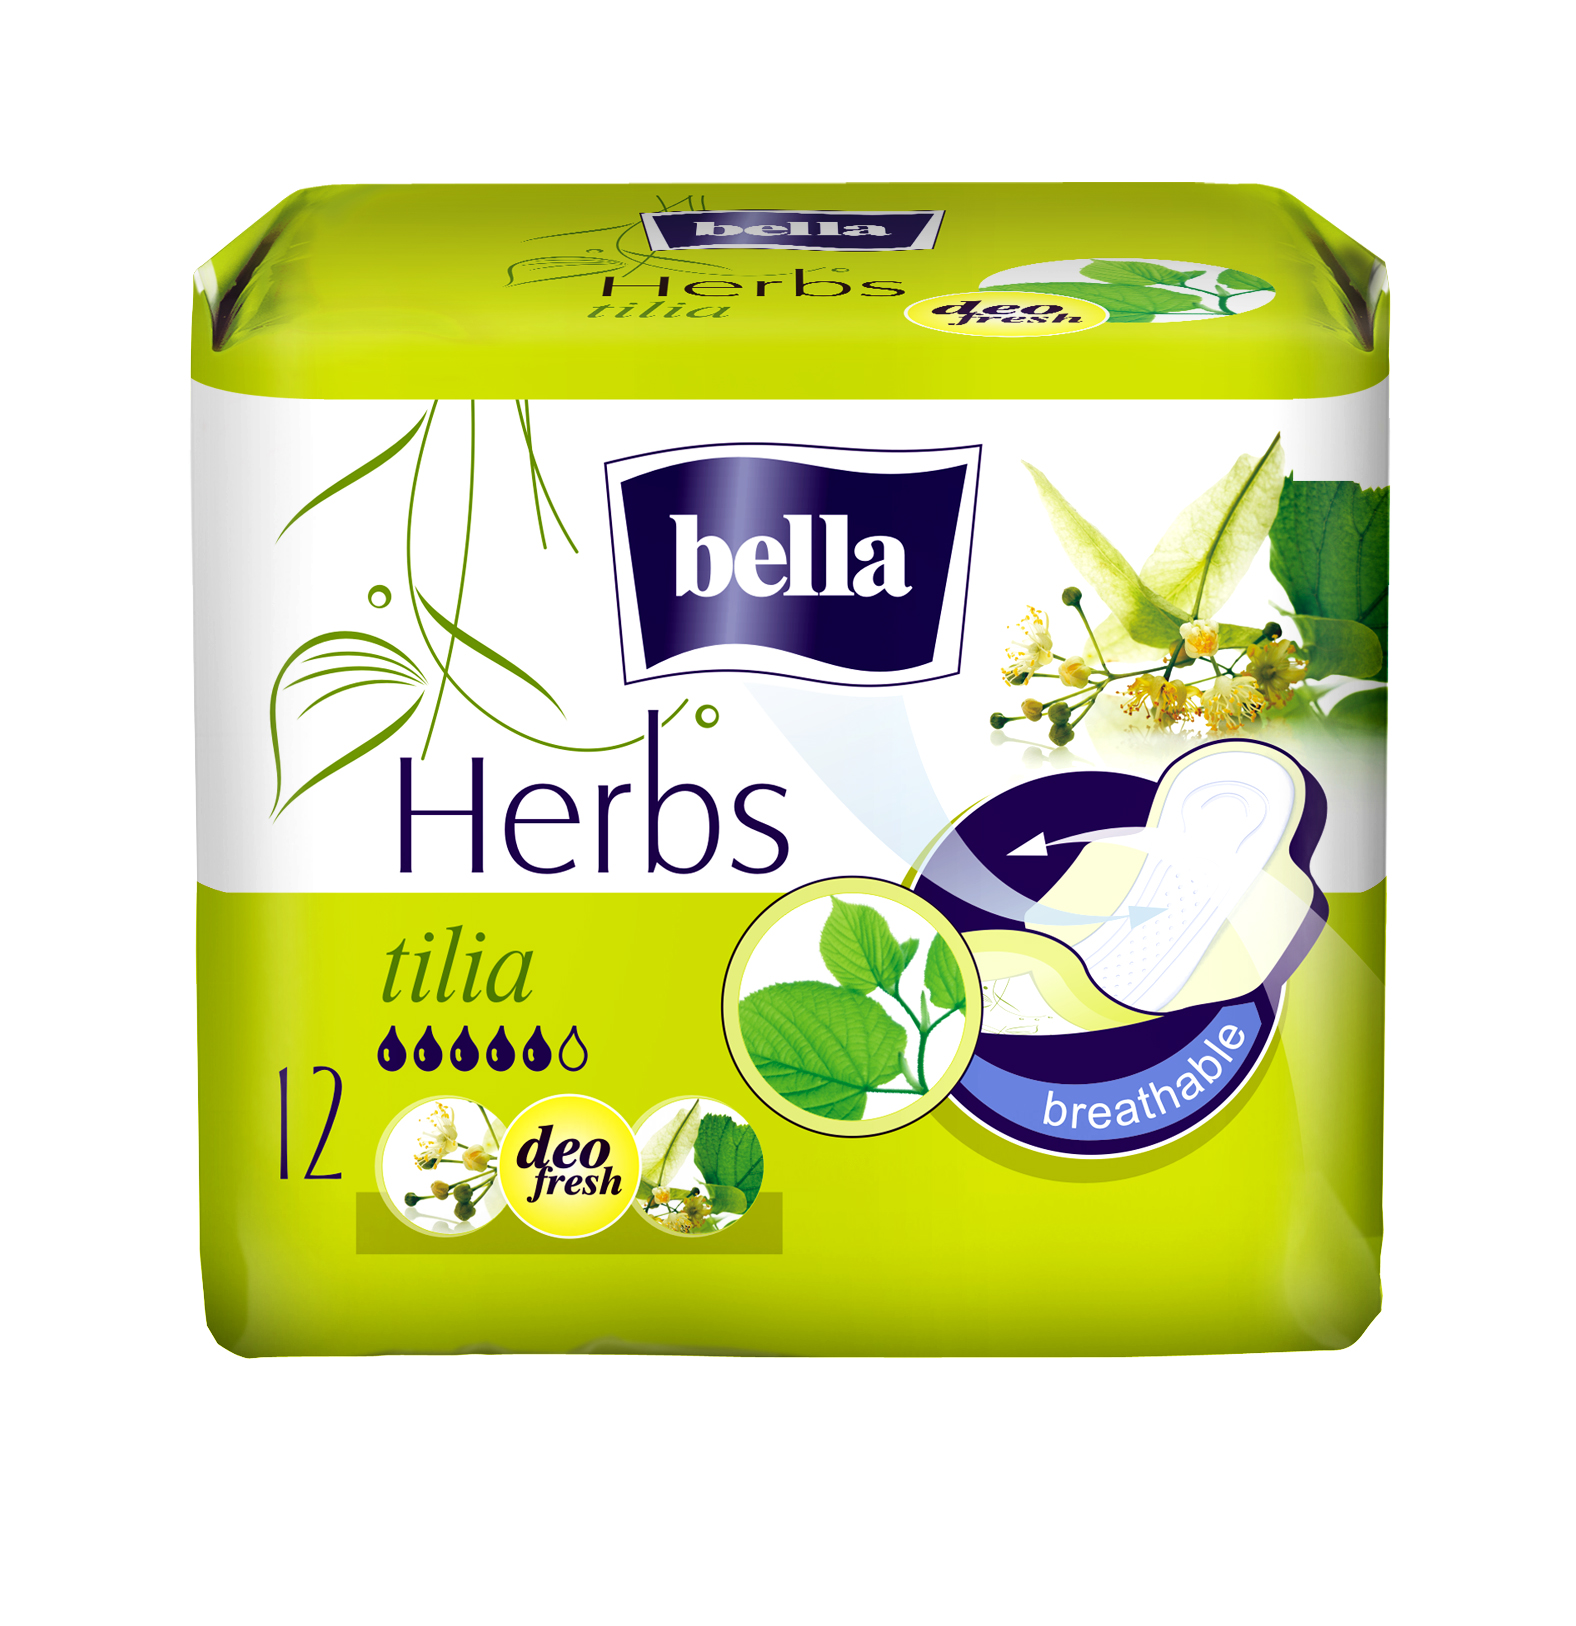 BELLA HERBS SANITARY PADS WITH TILIA FLOWER 12 PCS